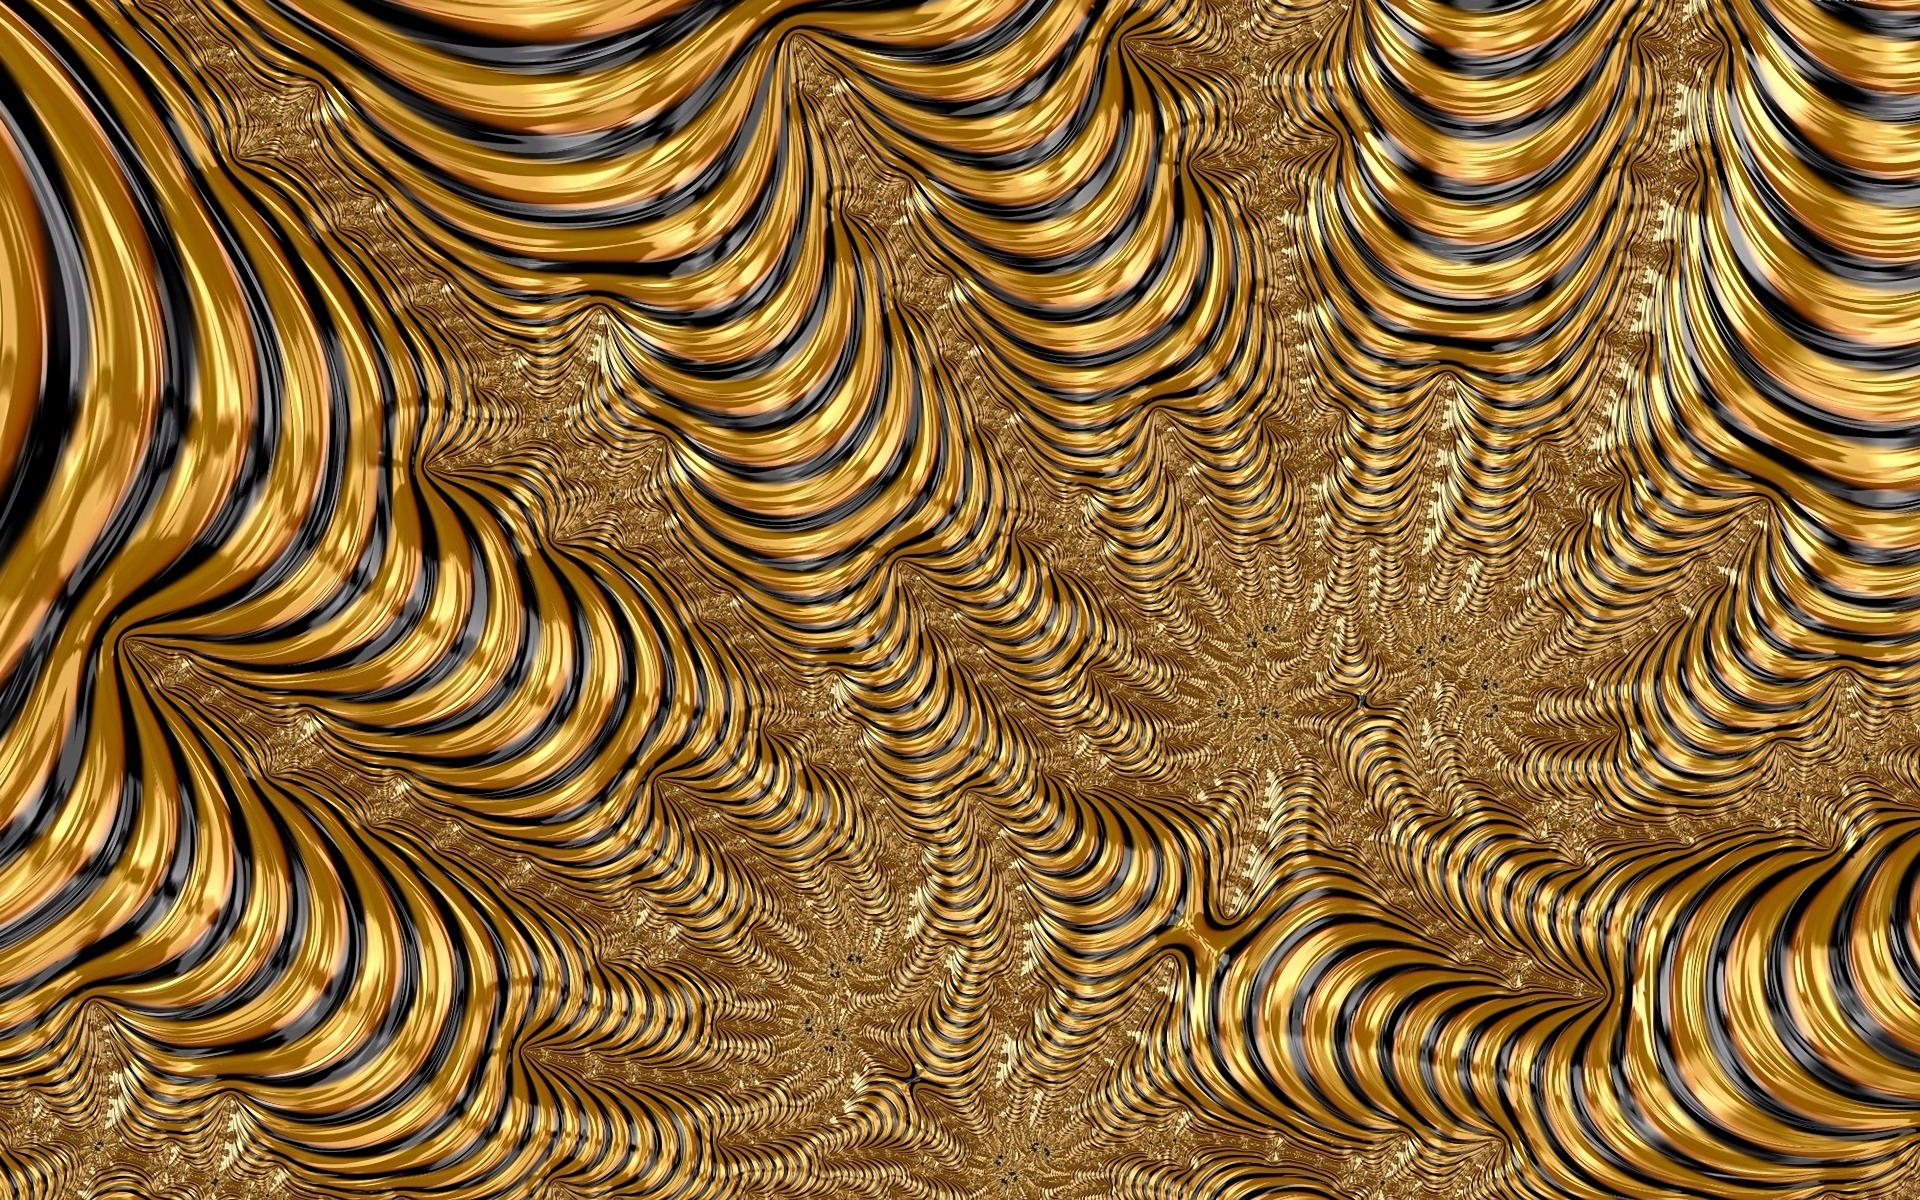 Black and Gold Abstract HD Wallpaper Background Image